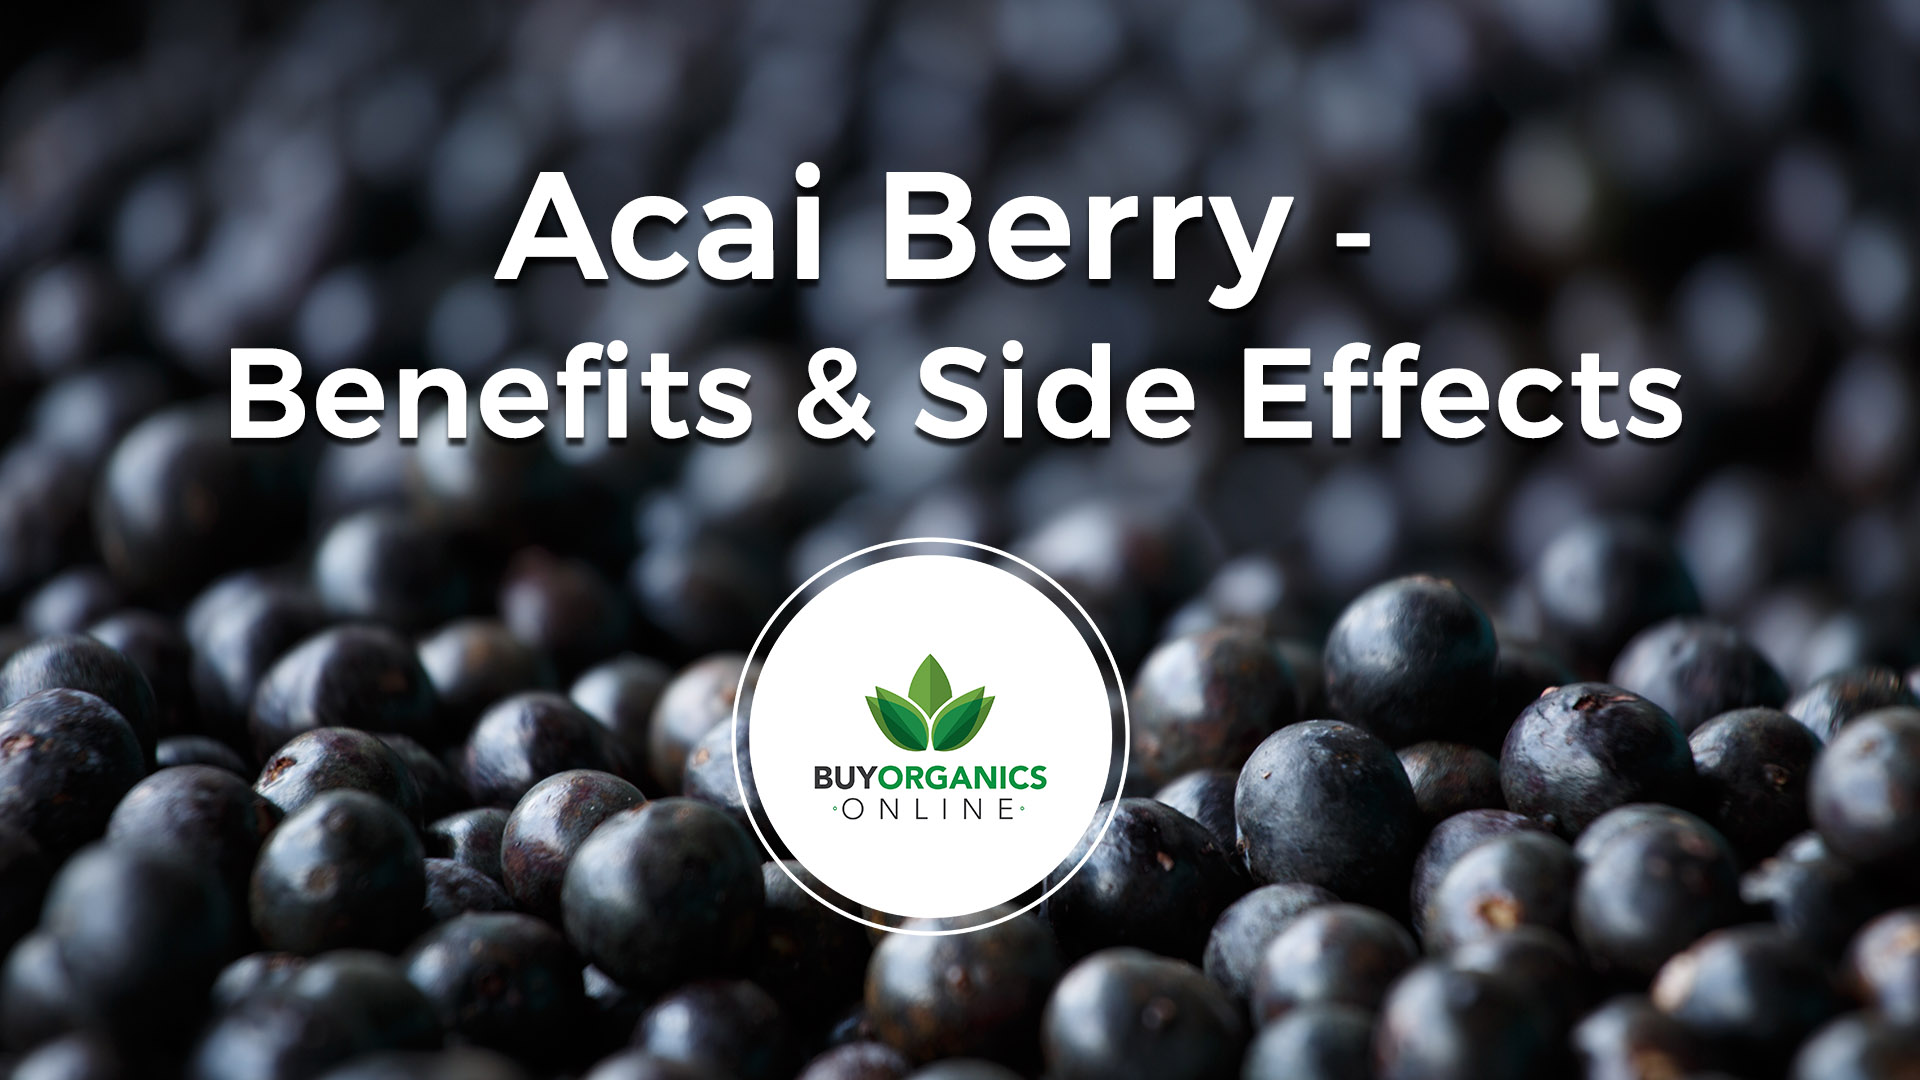 Acai Berry Products